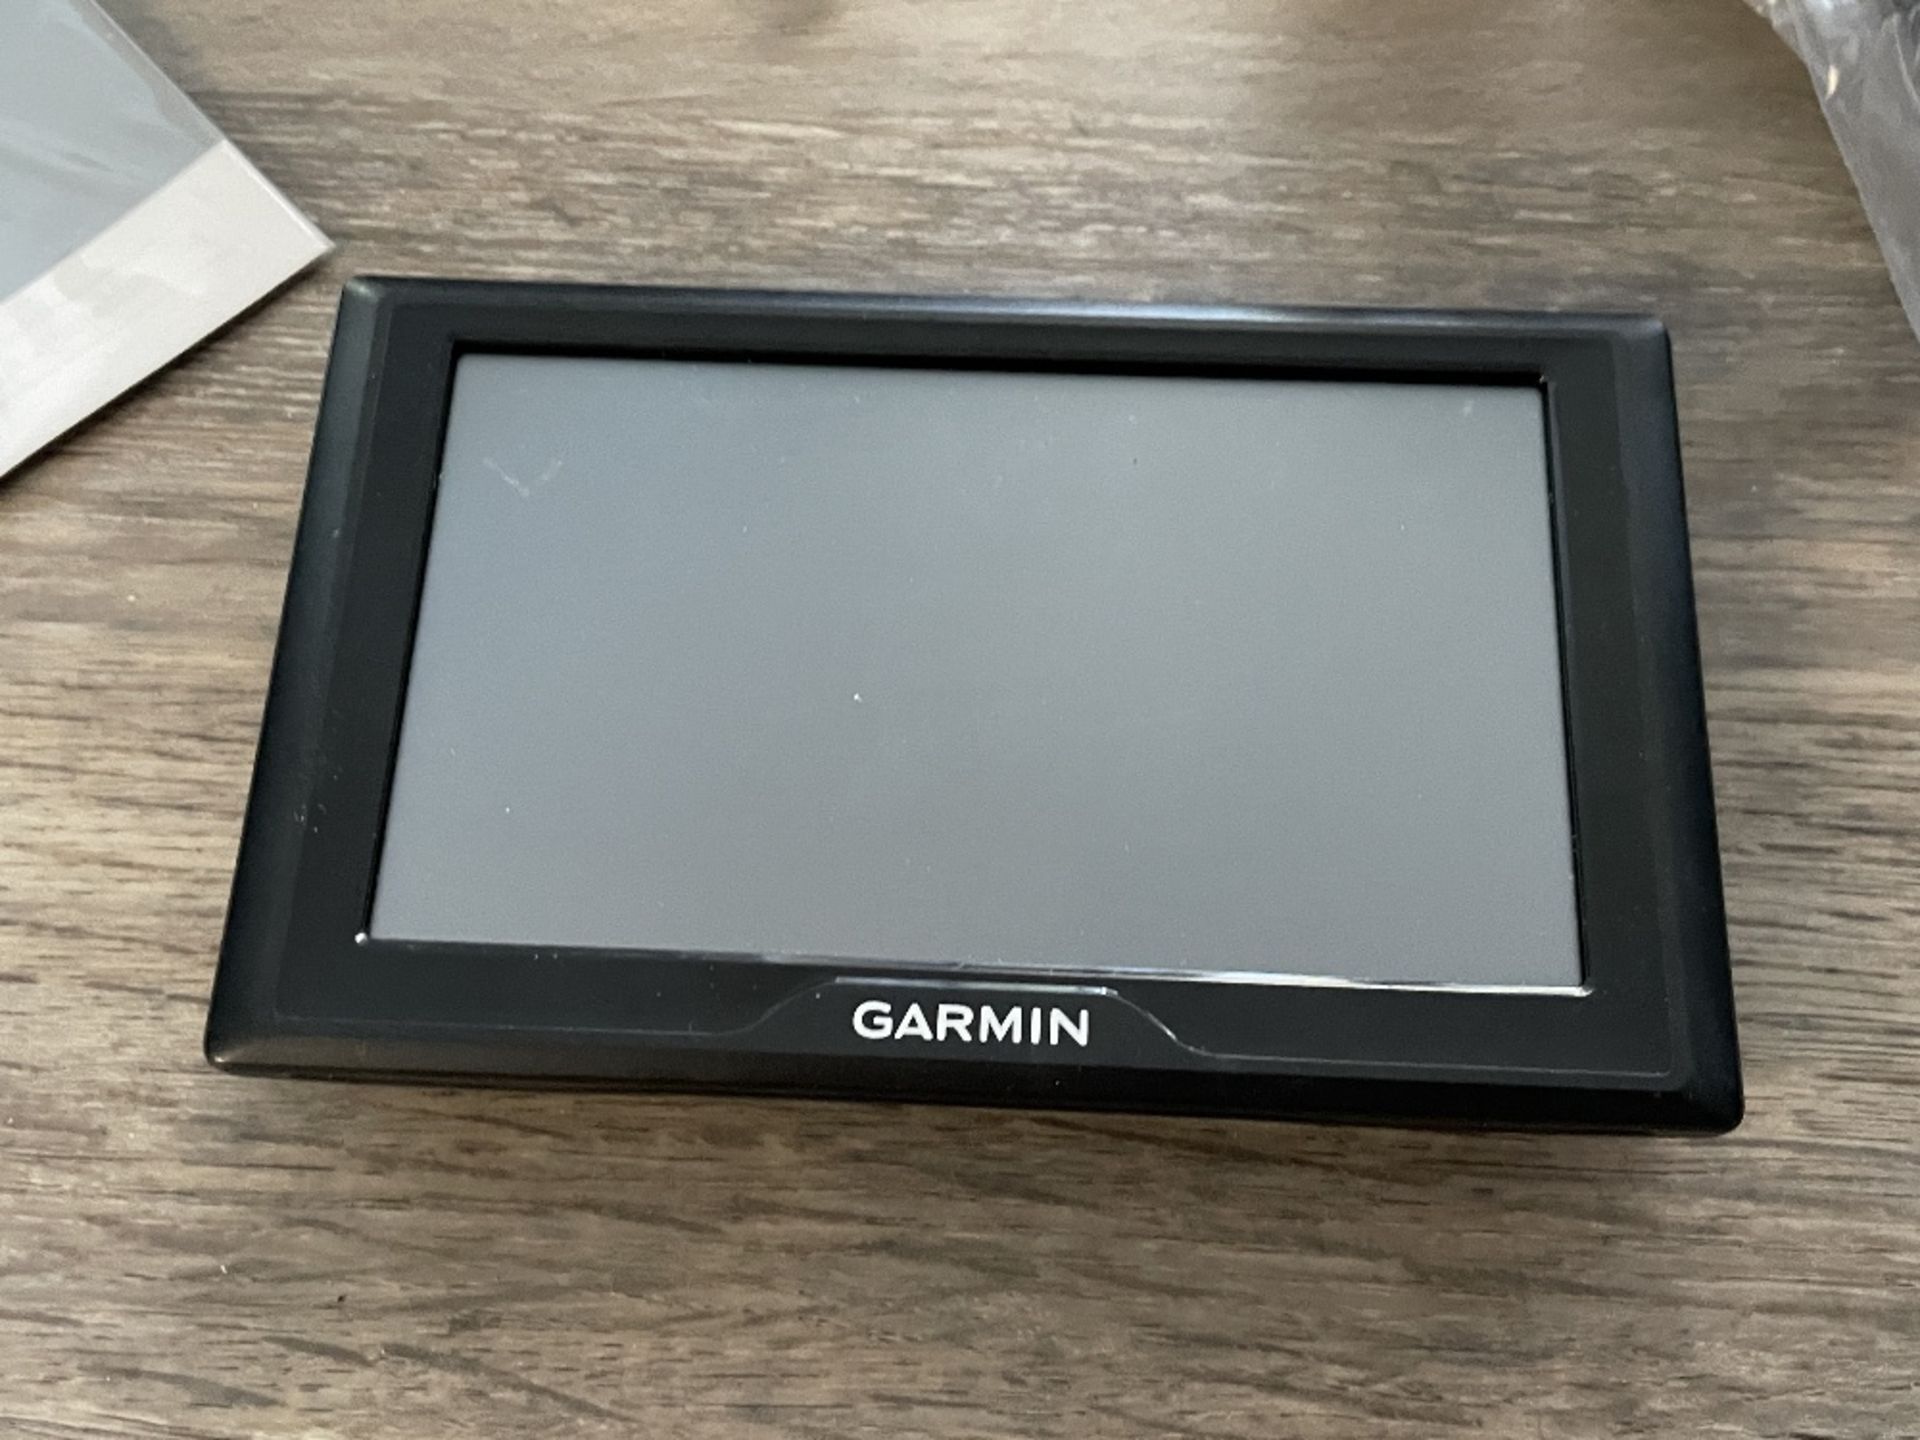 Garmin DRIVE 5I USA LM Navigation System, Used in Box - Image 3 of 4